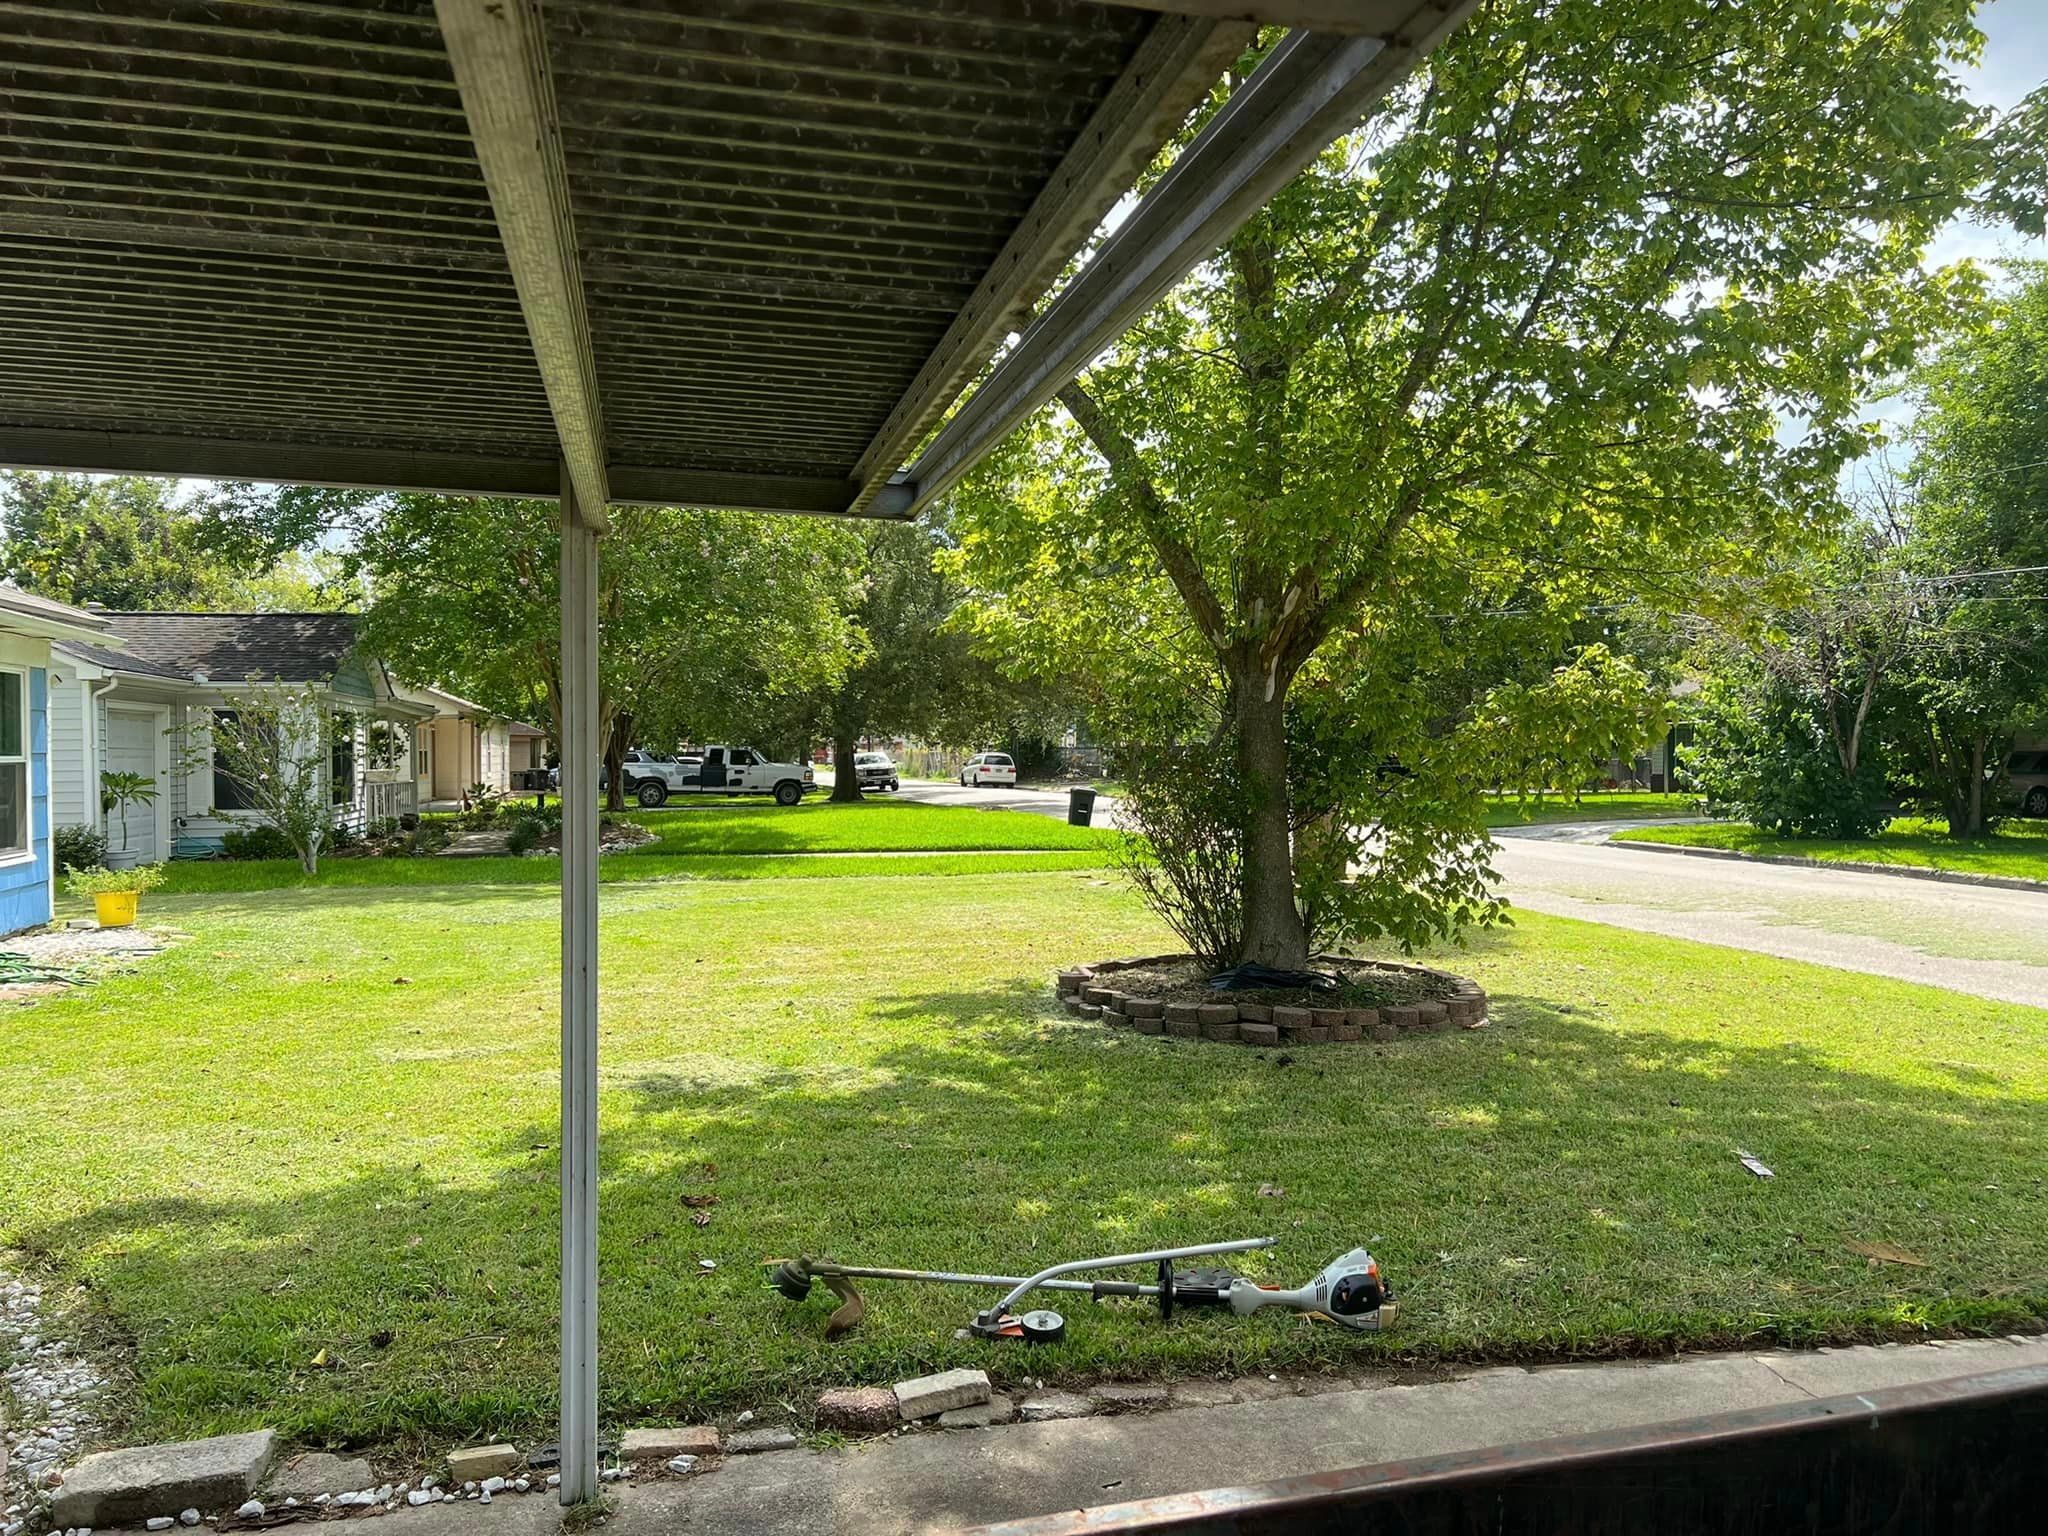 Lawn Care for Bobby’s lawn services in Baytown, TX